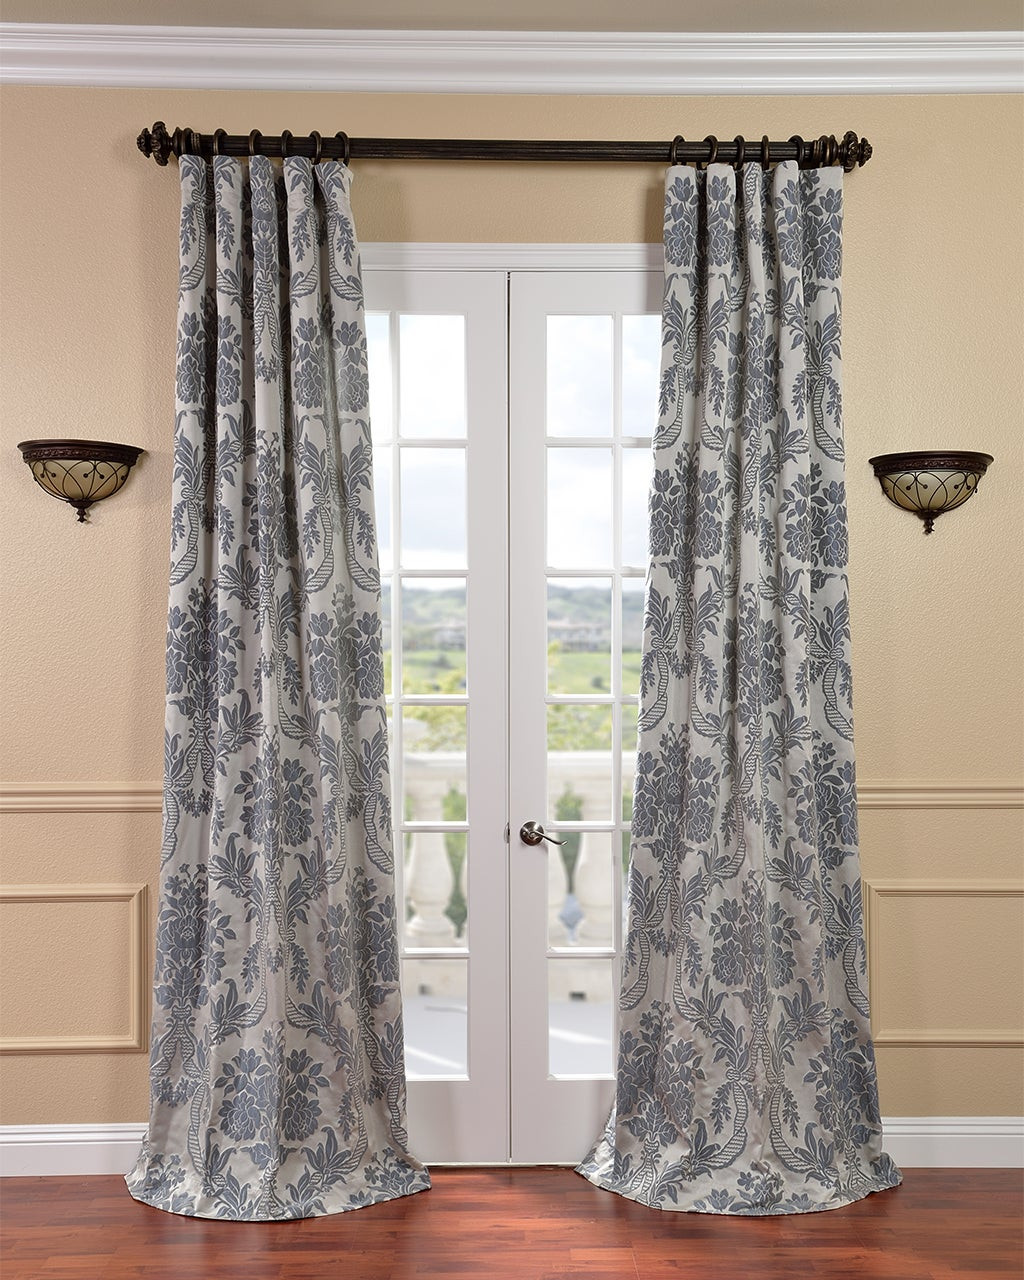 Overstock Kitchen Curtains
 Damask Curtains Overstock Stylish Drapes